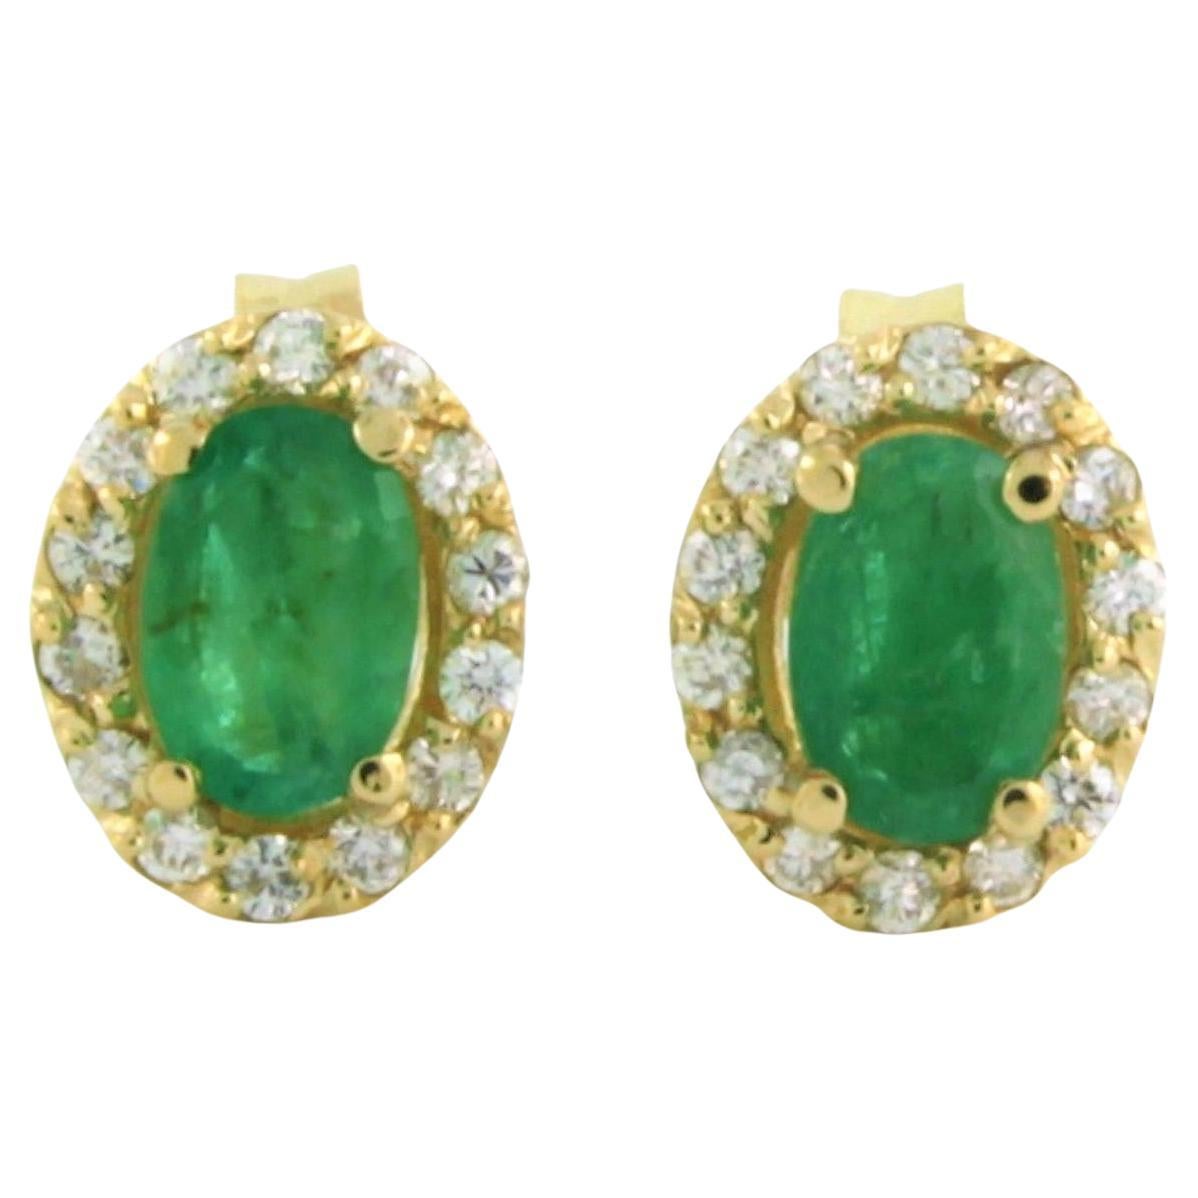 Cluster earrings studs set with emerald and diamonds 14k yellow gold